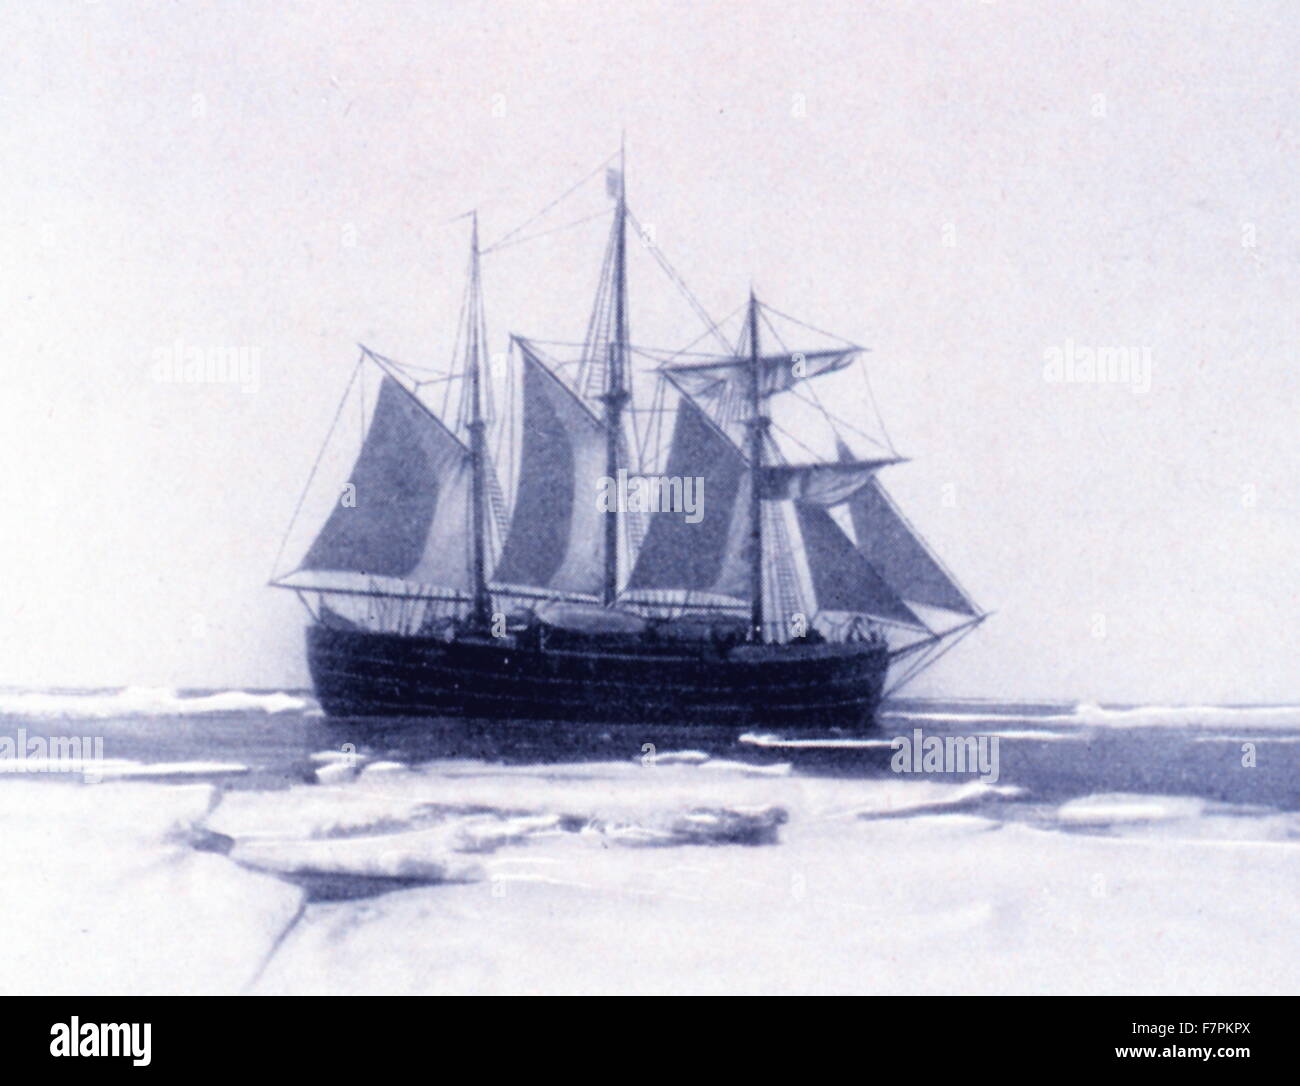 The FRAM under sail. In: 'The South Pole', by Roald Amundsen, 1872-1928. Fram ('Forward') is a ship that was used in expeditions of the Arctic and Antarctic regions by the Norwegian explorers Fridtjof Nansen, Otto Sverdrup, Oscar Wisting, and Roald Amundsen between 1893 and 1912. Stock Photo